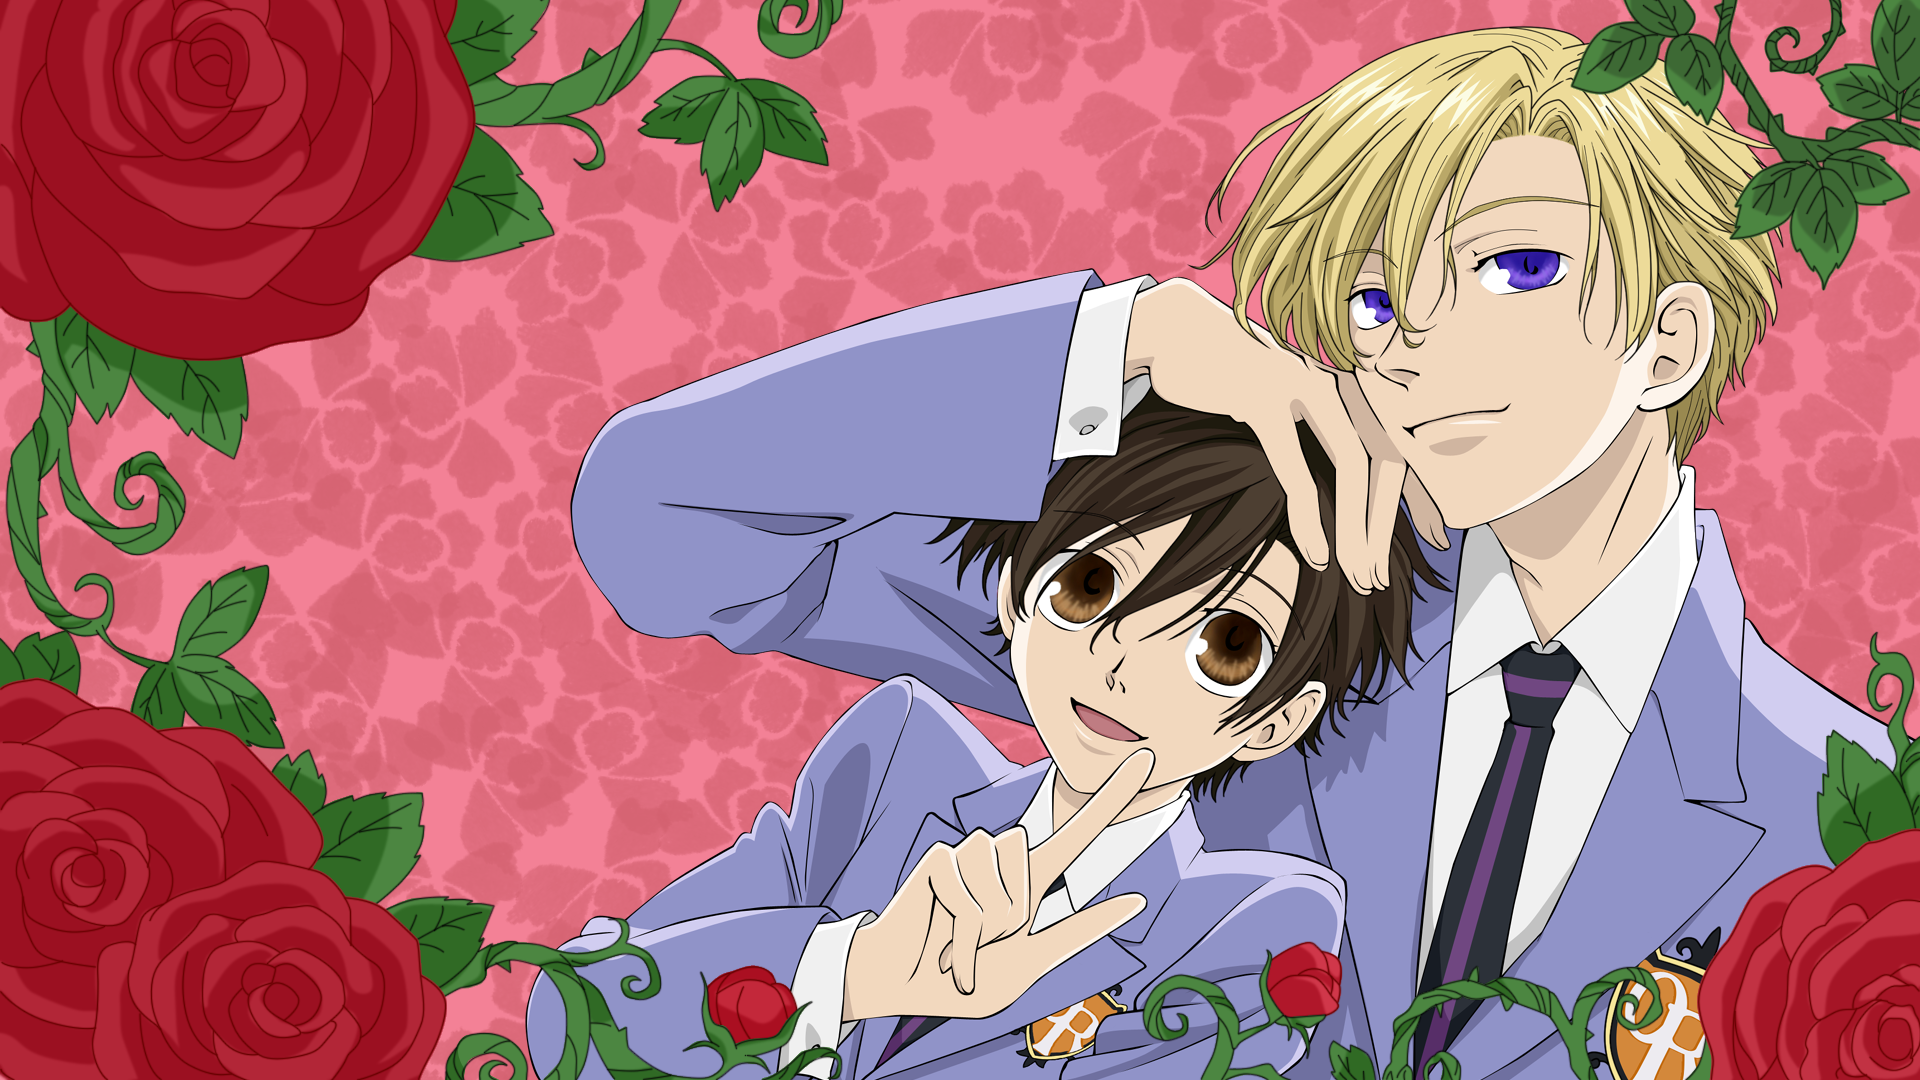 3. "Tamaki Suoh" from Ouran High School Host Club - wide 4